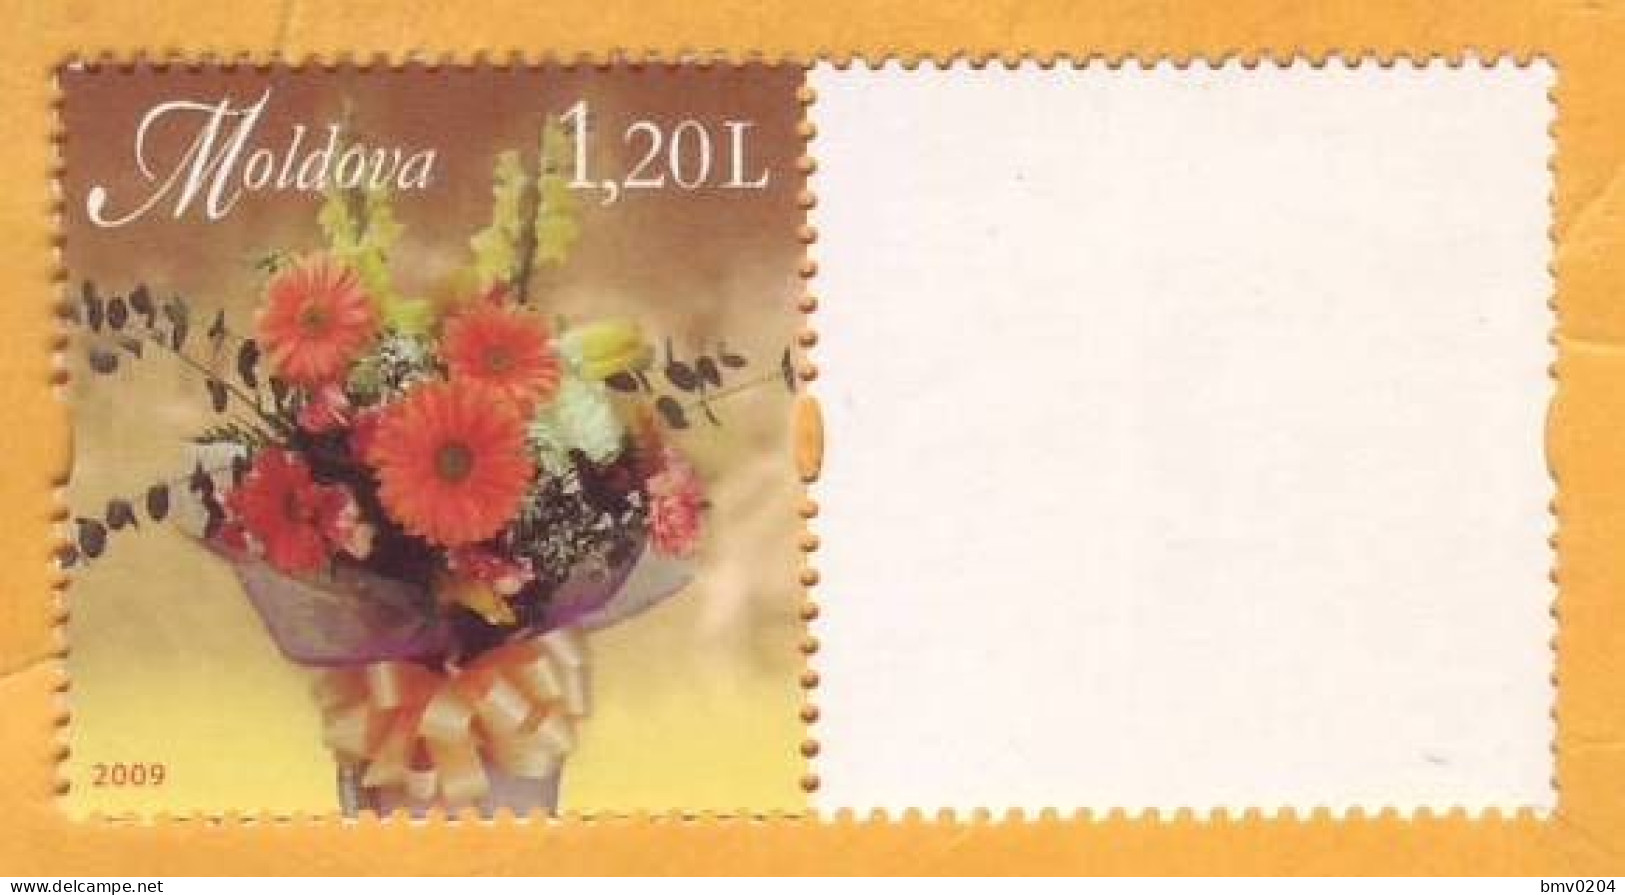 2009 2013 Moldova Personalized Postage Stamps, Issue 1.  SAMPLES. Wildflowers  1v  Mint - Moldawien (Moldau)